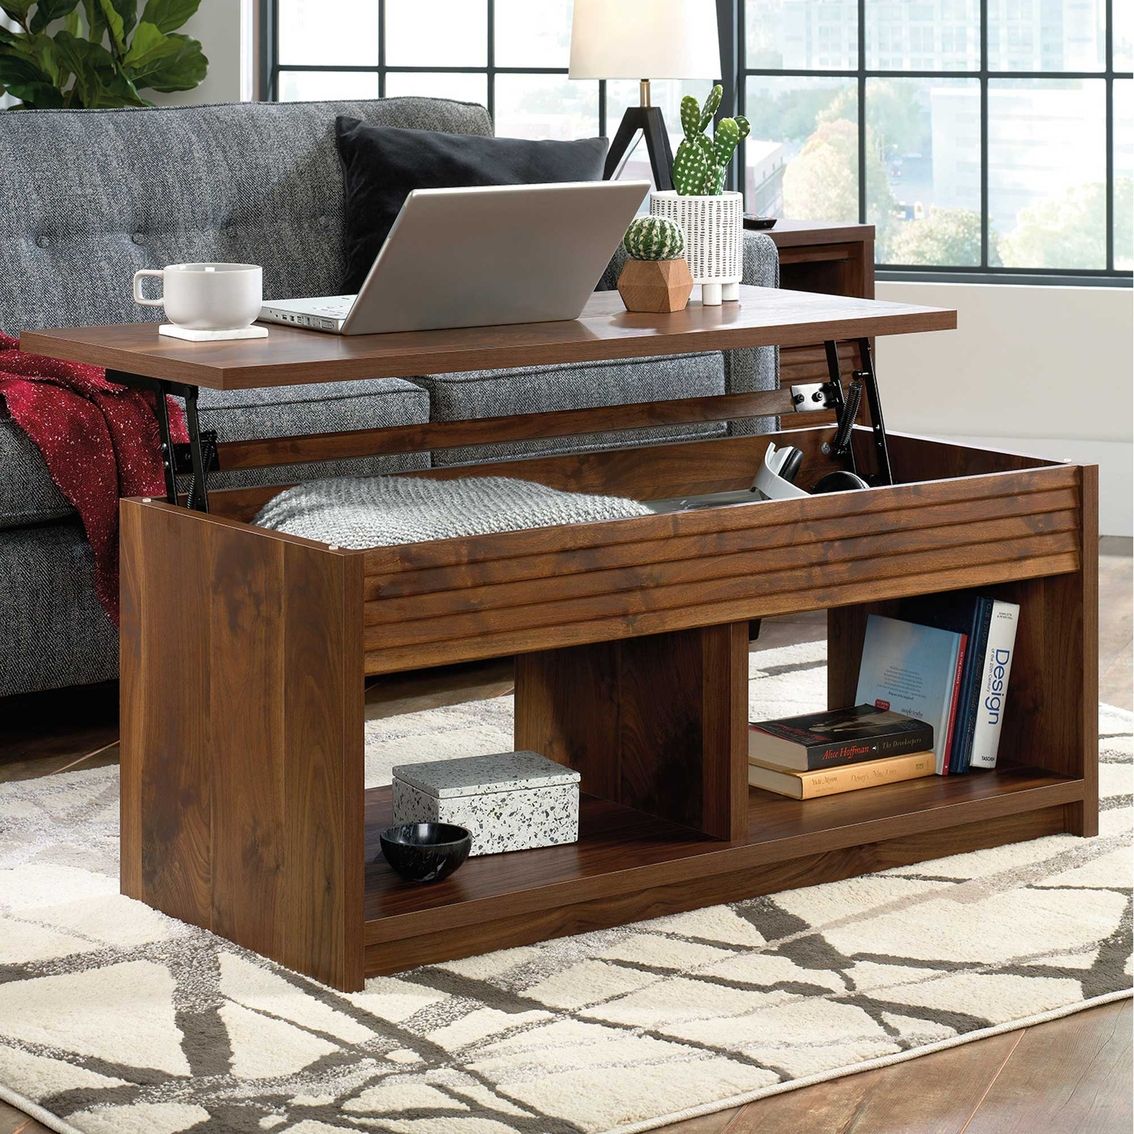 Sauder Lift Top Coffee Table With Storage Shelves | Living Room Tables |  Furniture & Appliances | Shop The Exchange Regarding Lift Top Coffee Tables With Shelves (View 7 of 15)